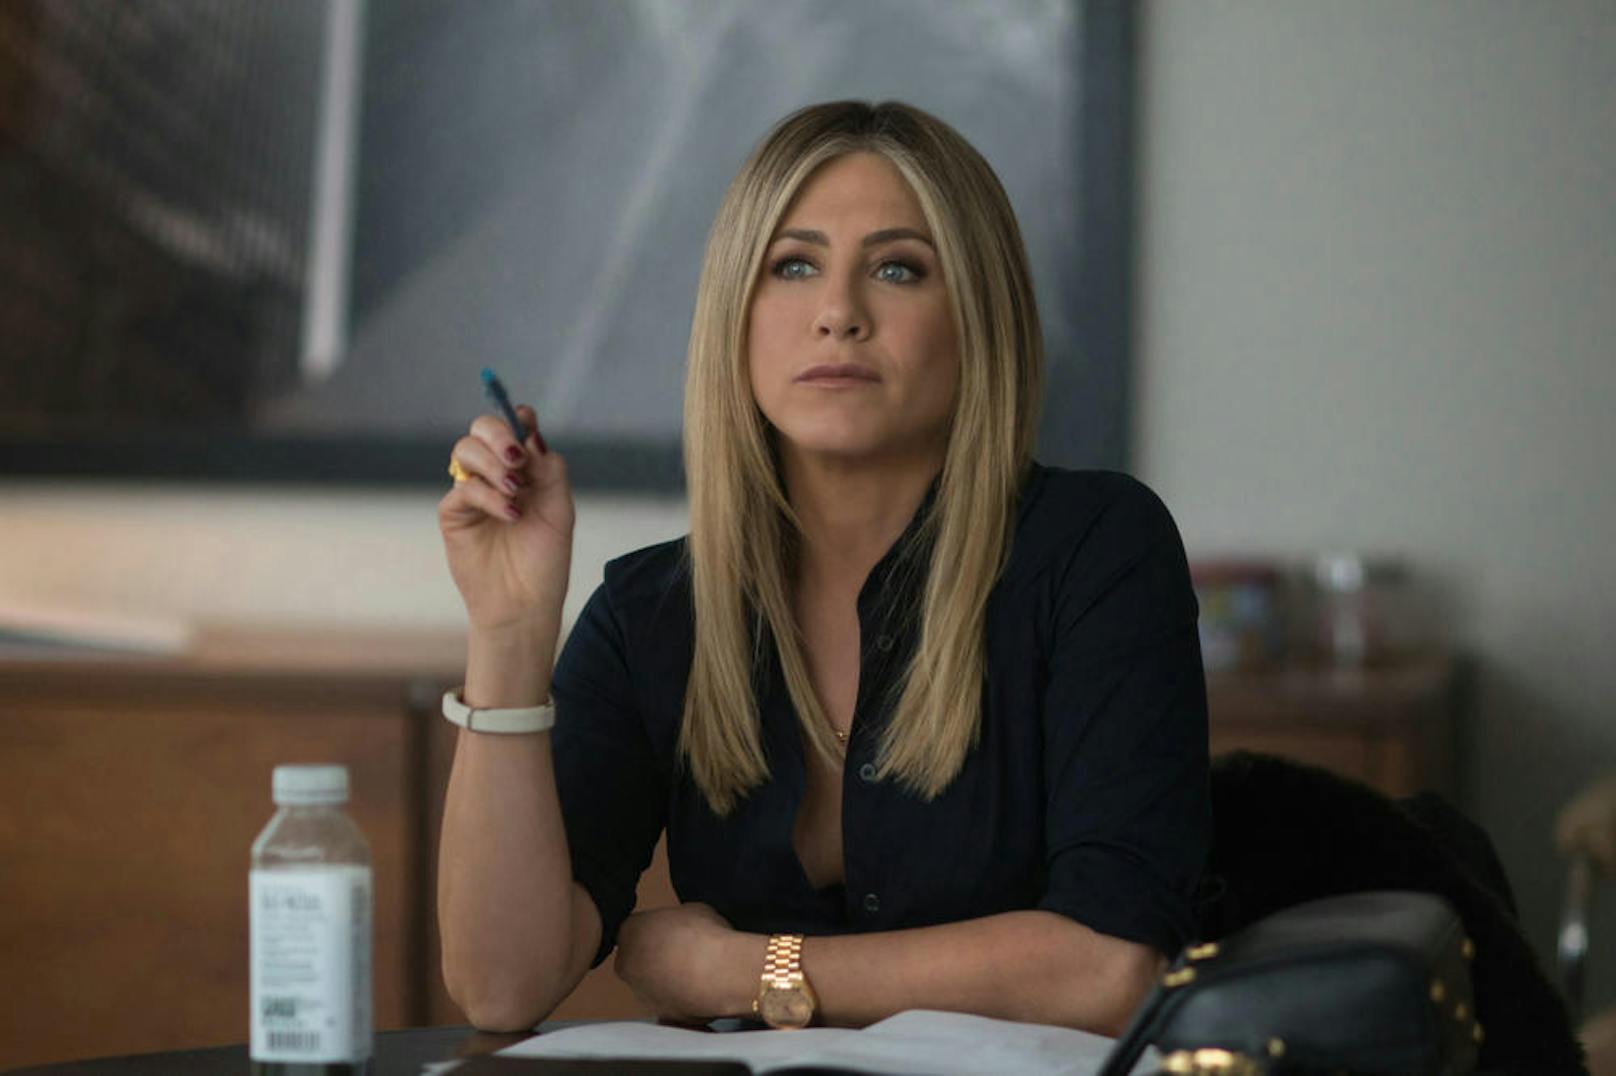 Jennifer Aniston in "Office Christmas Party"